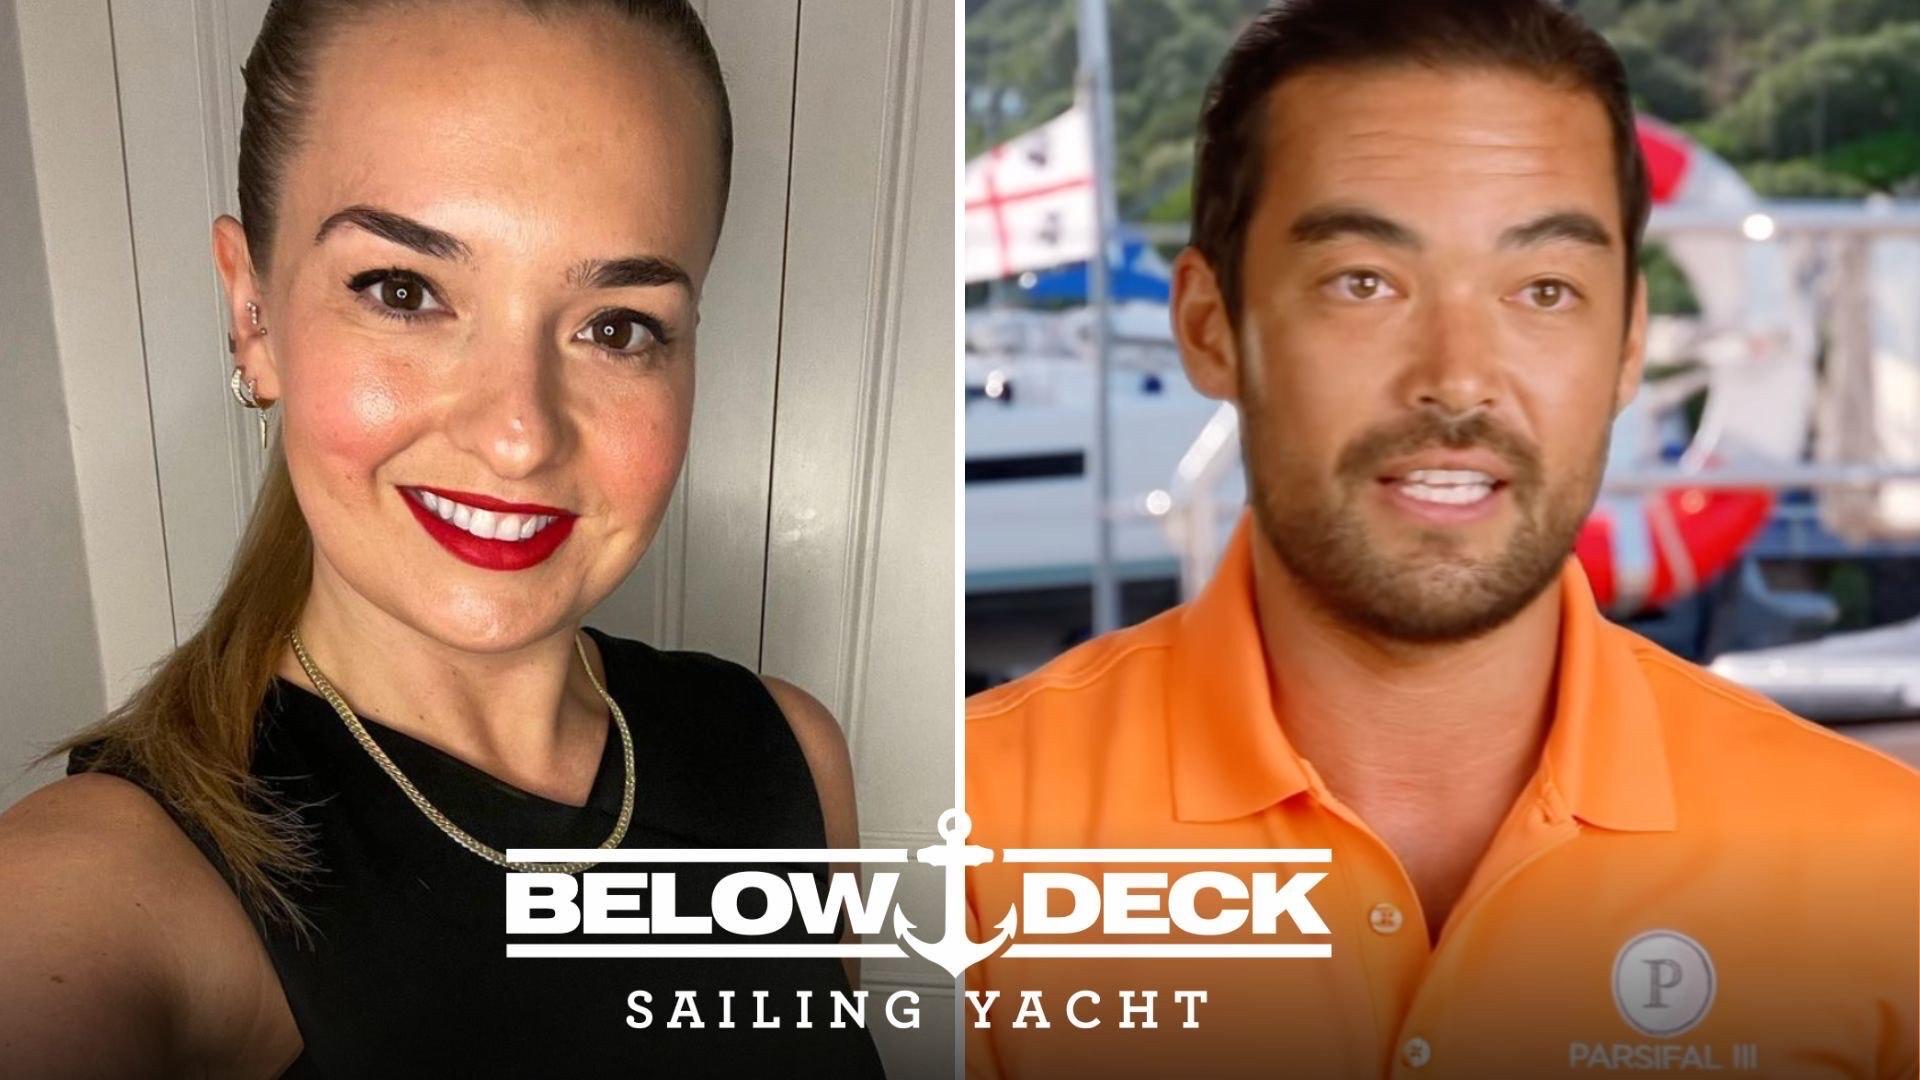 Colin and Daisy from Below Deck Sailing Yacht Season 4